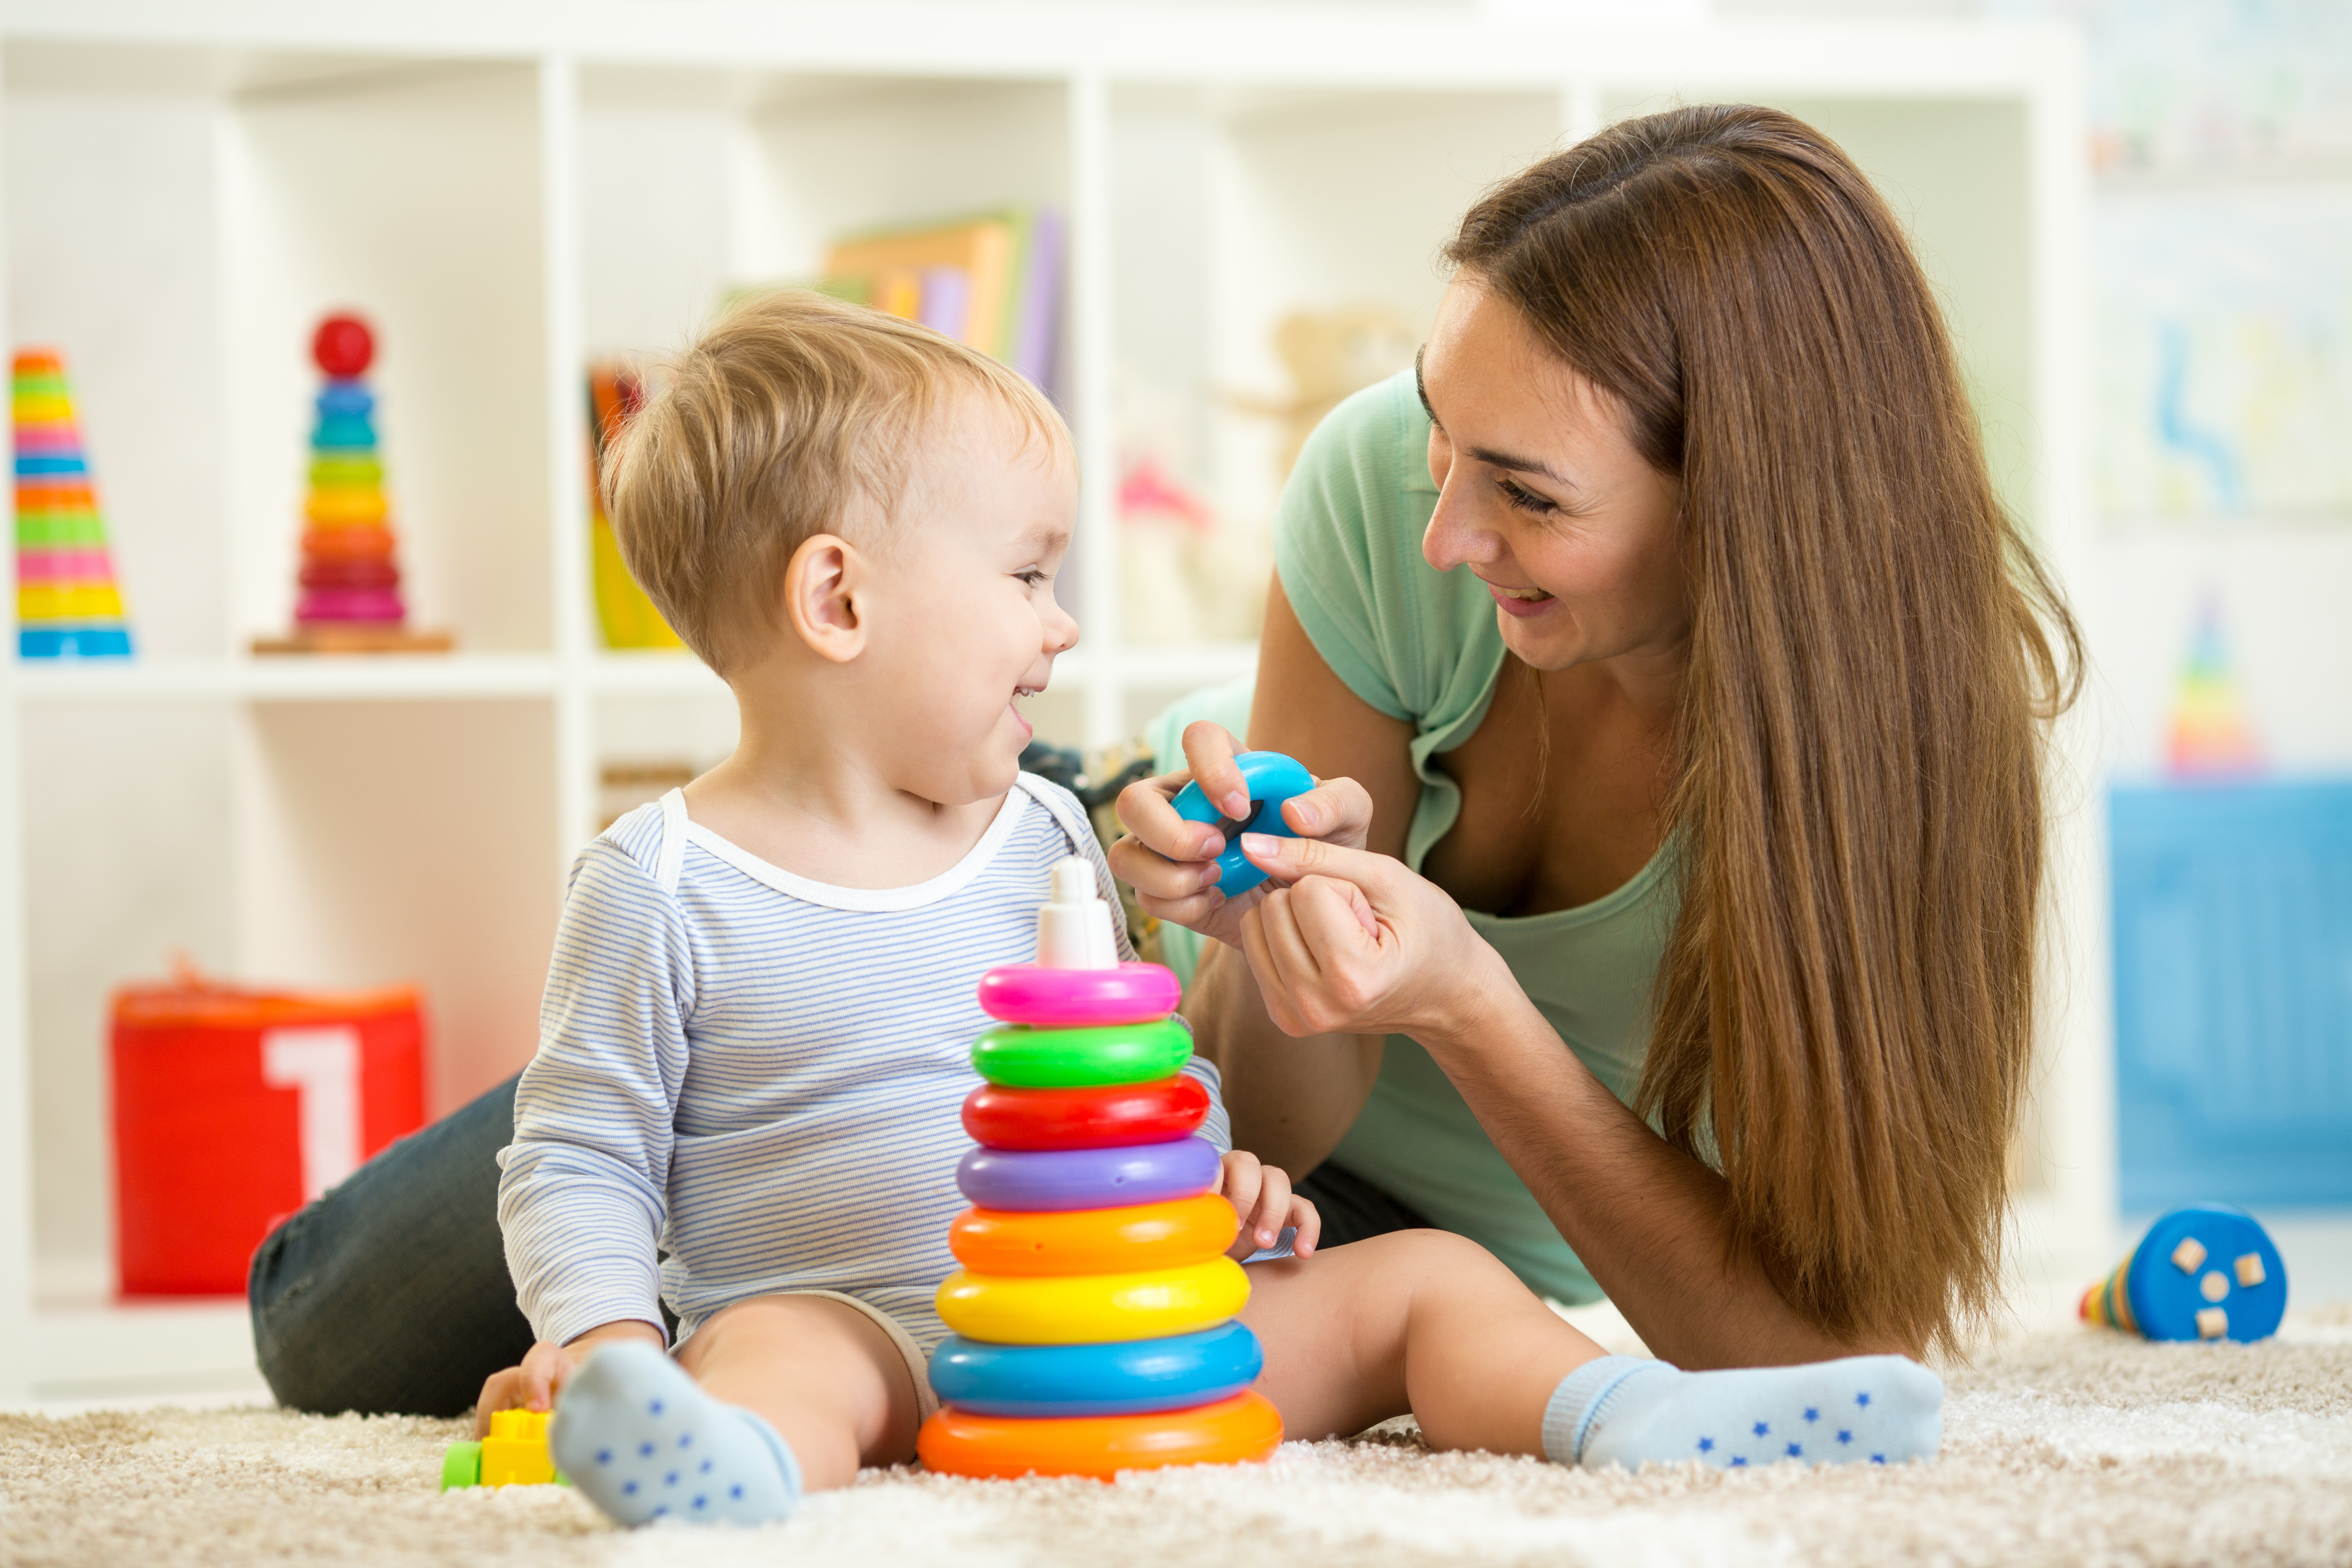 Childminder and toddler smiling, playing with coloured toy rings 